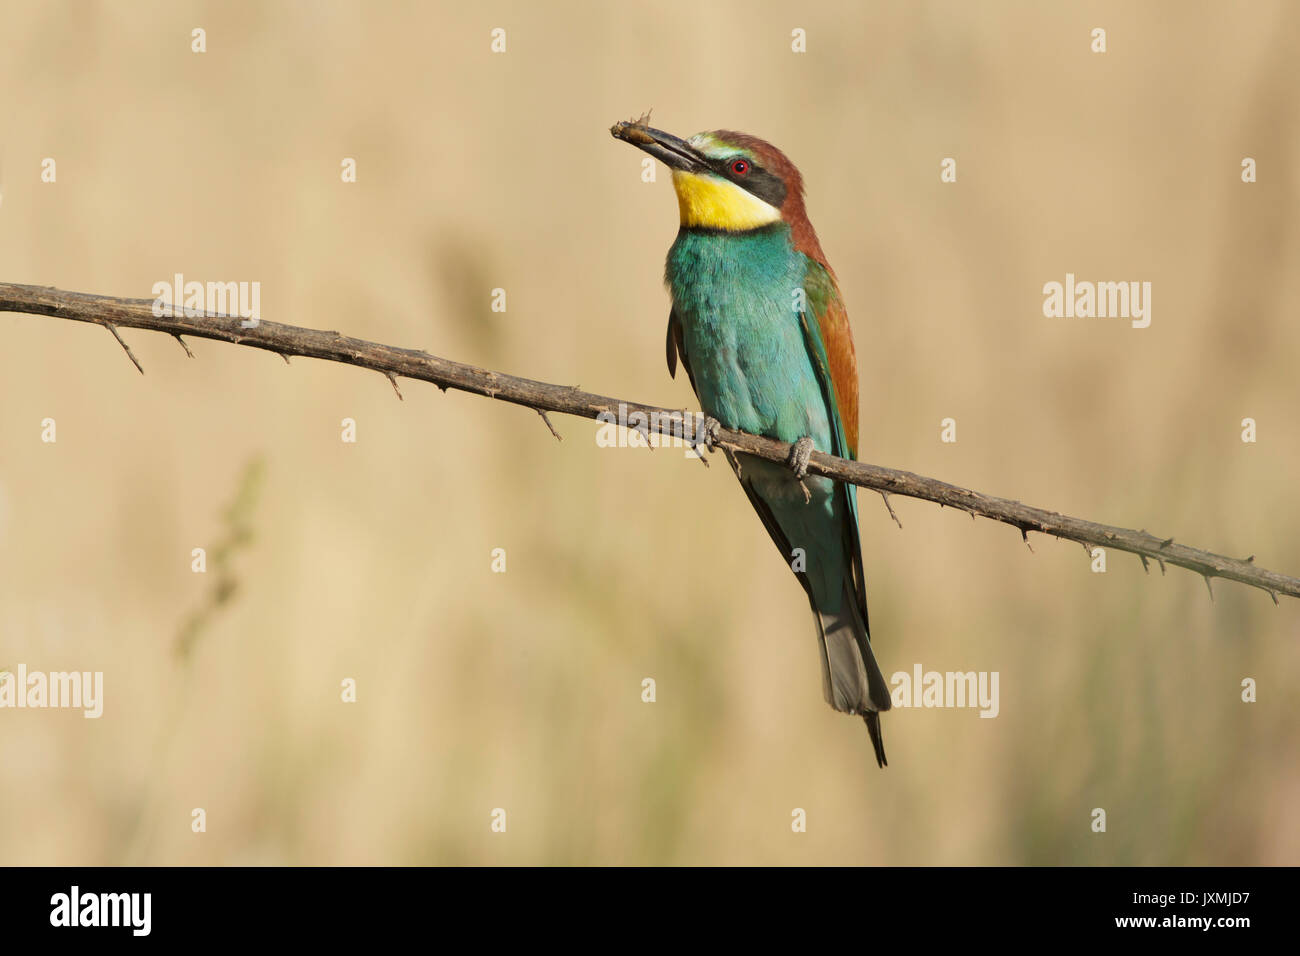 European Bee-eater (Merops apiaster) adult, with insect prey, perched on twig at sandbank colony, Vojvodina, Serbia, May Stock Photo